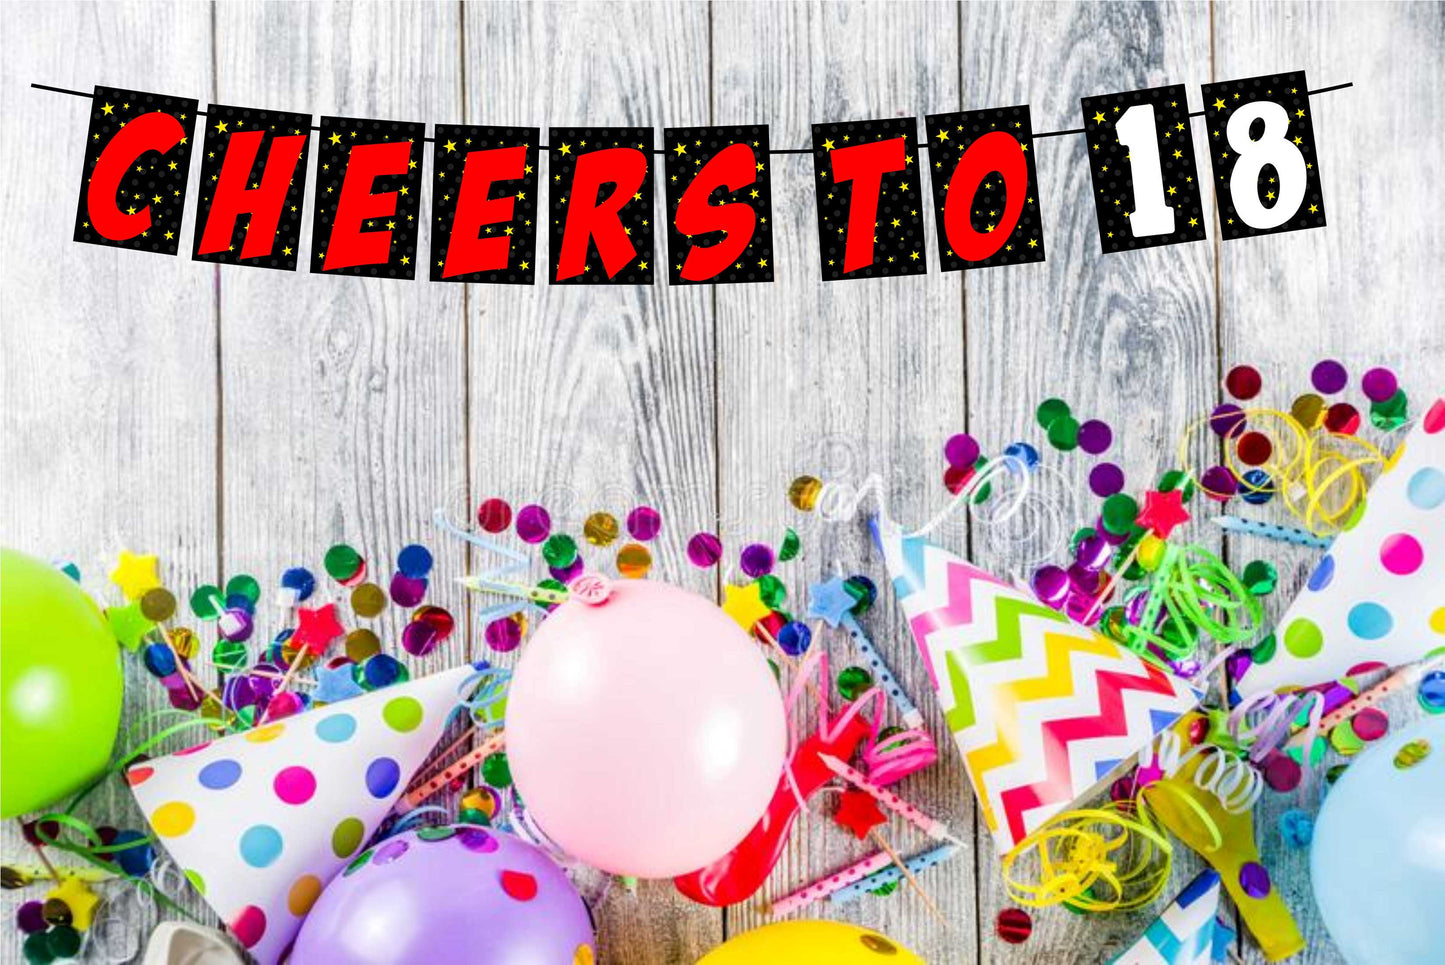 Cheers to 18 Birthday Banner for Photo Shoot Backdrop and Theme Party